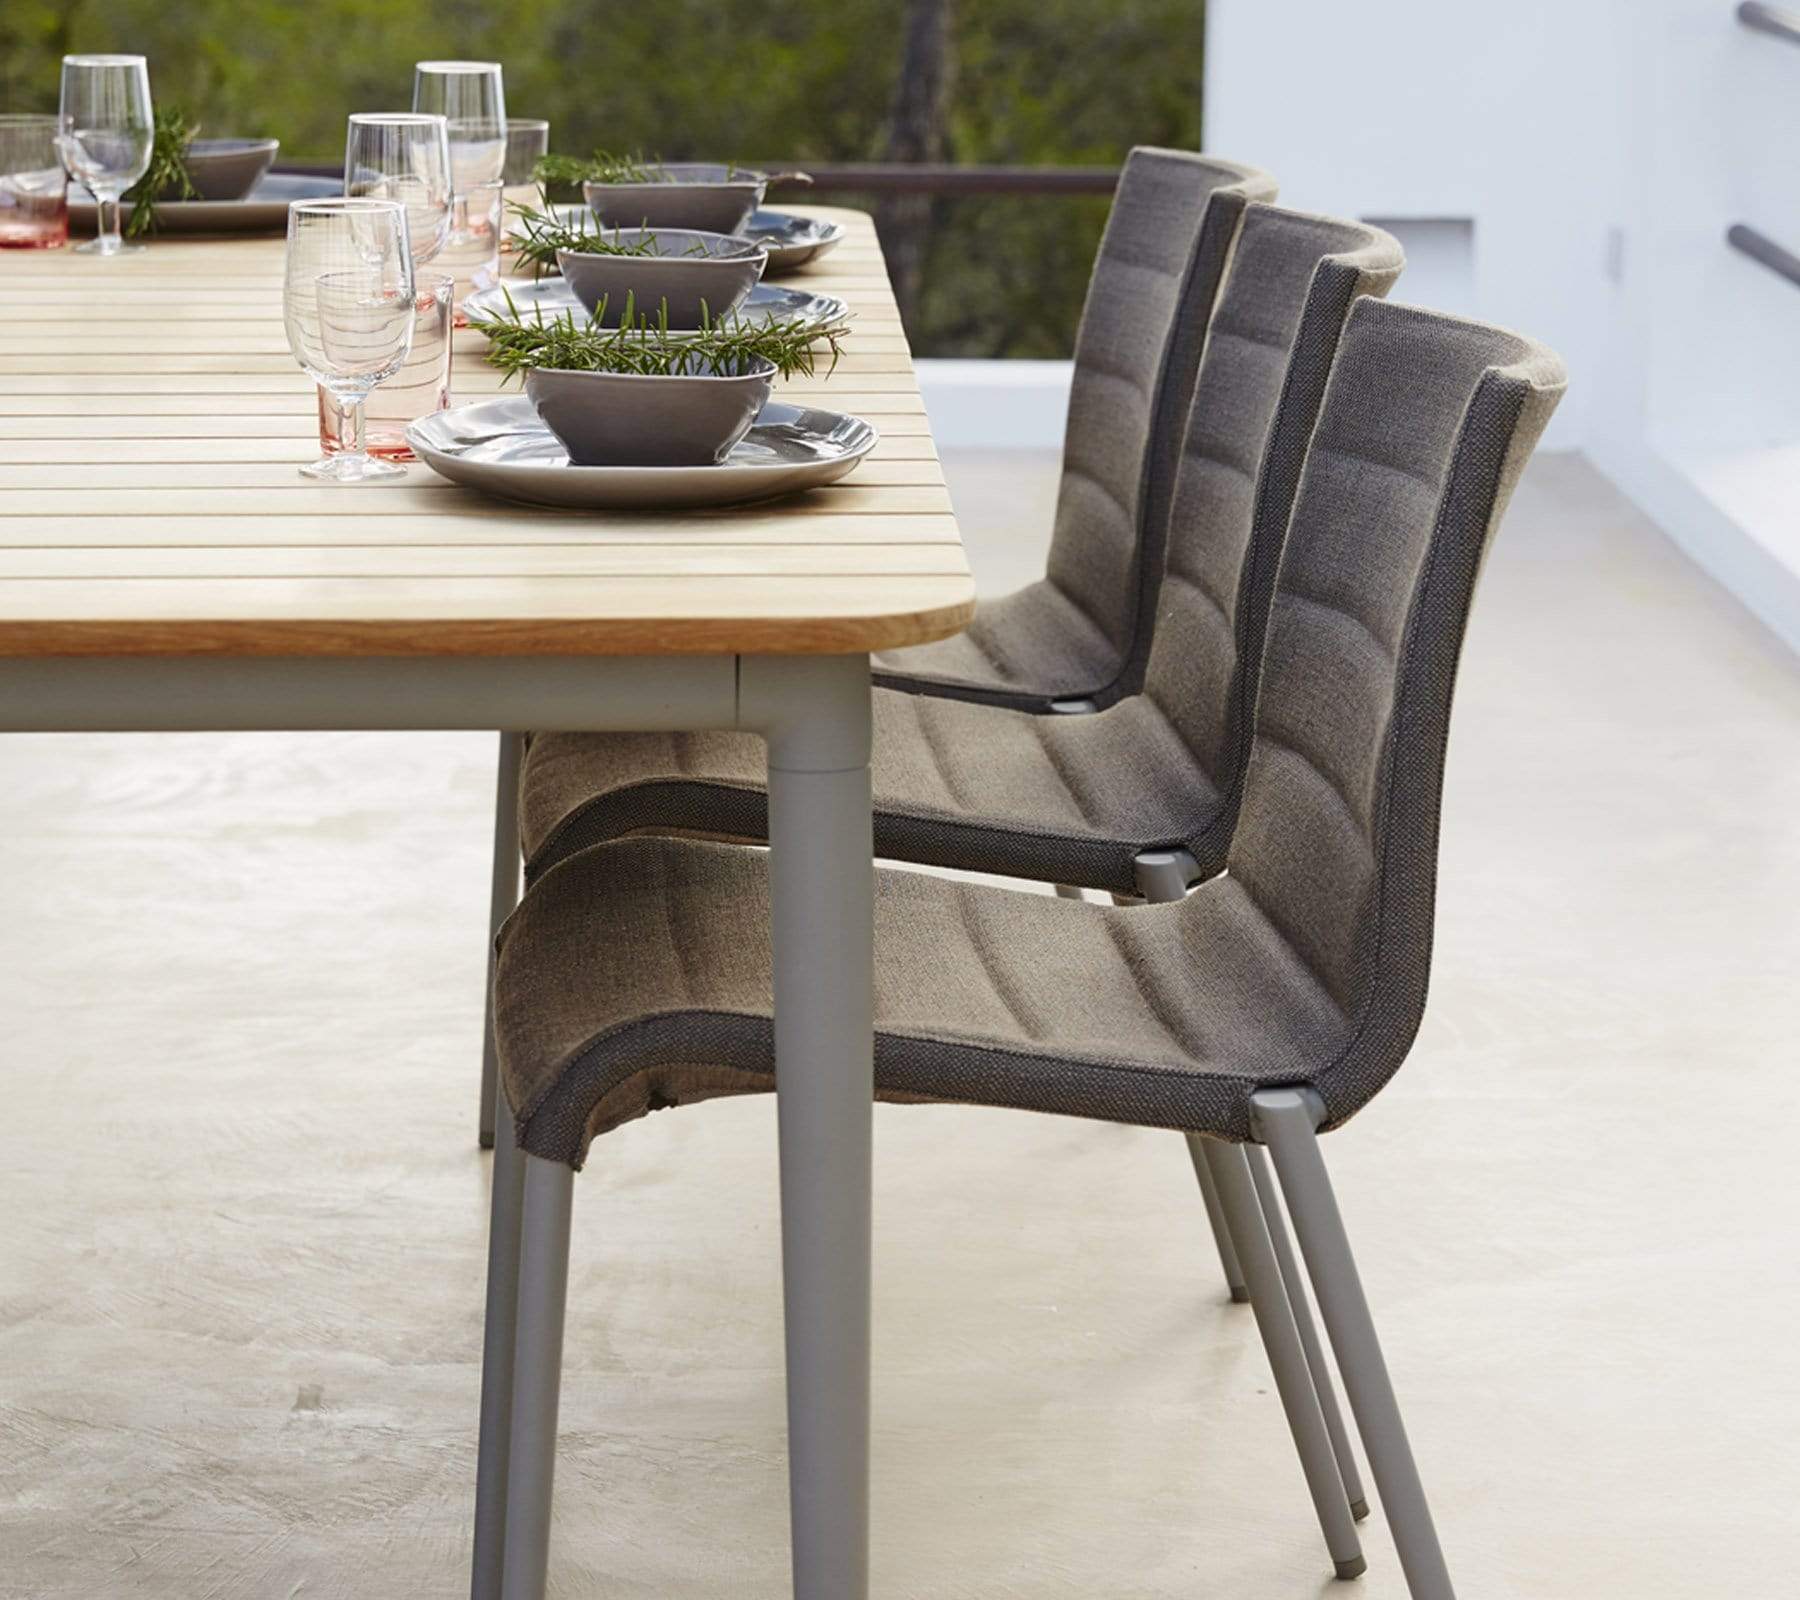 Boxhill's Core Garden Dining Table Taupe lifestyle image with Core Patio Dining Chair